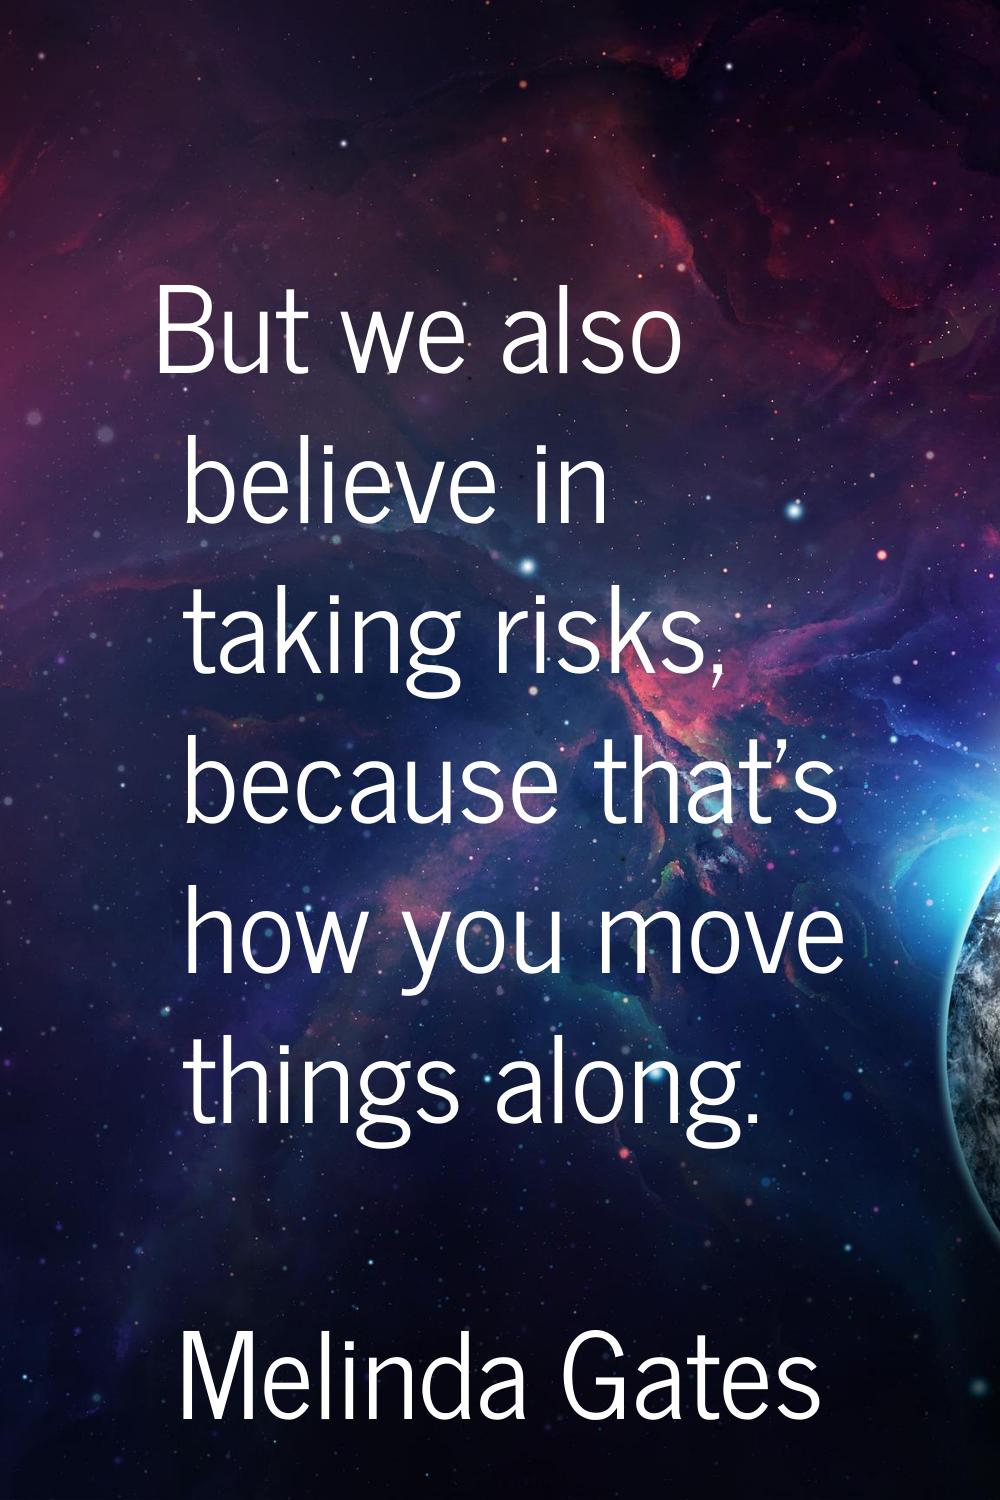 But we also believe in taking risks, because that's how you move things along.